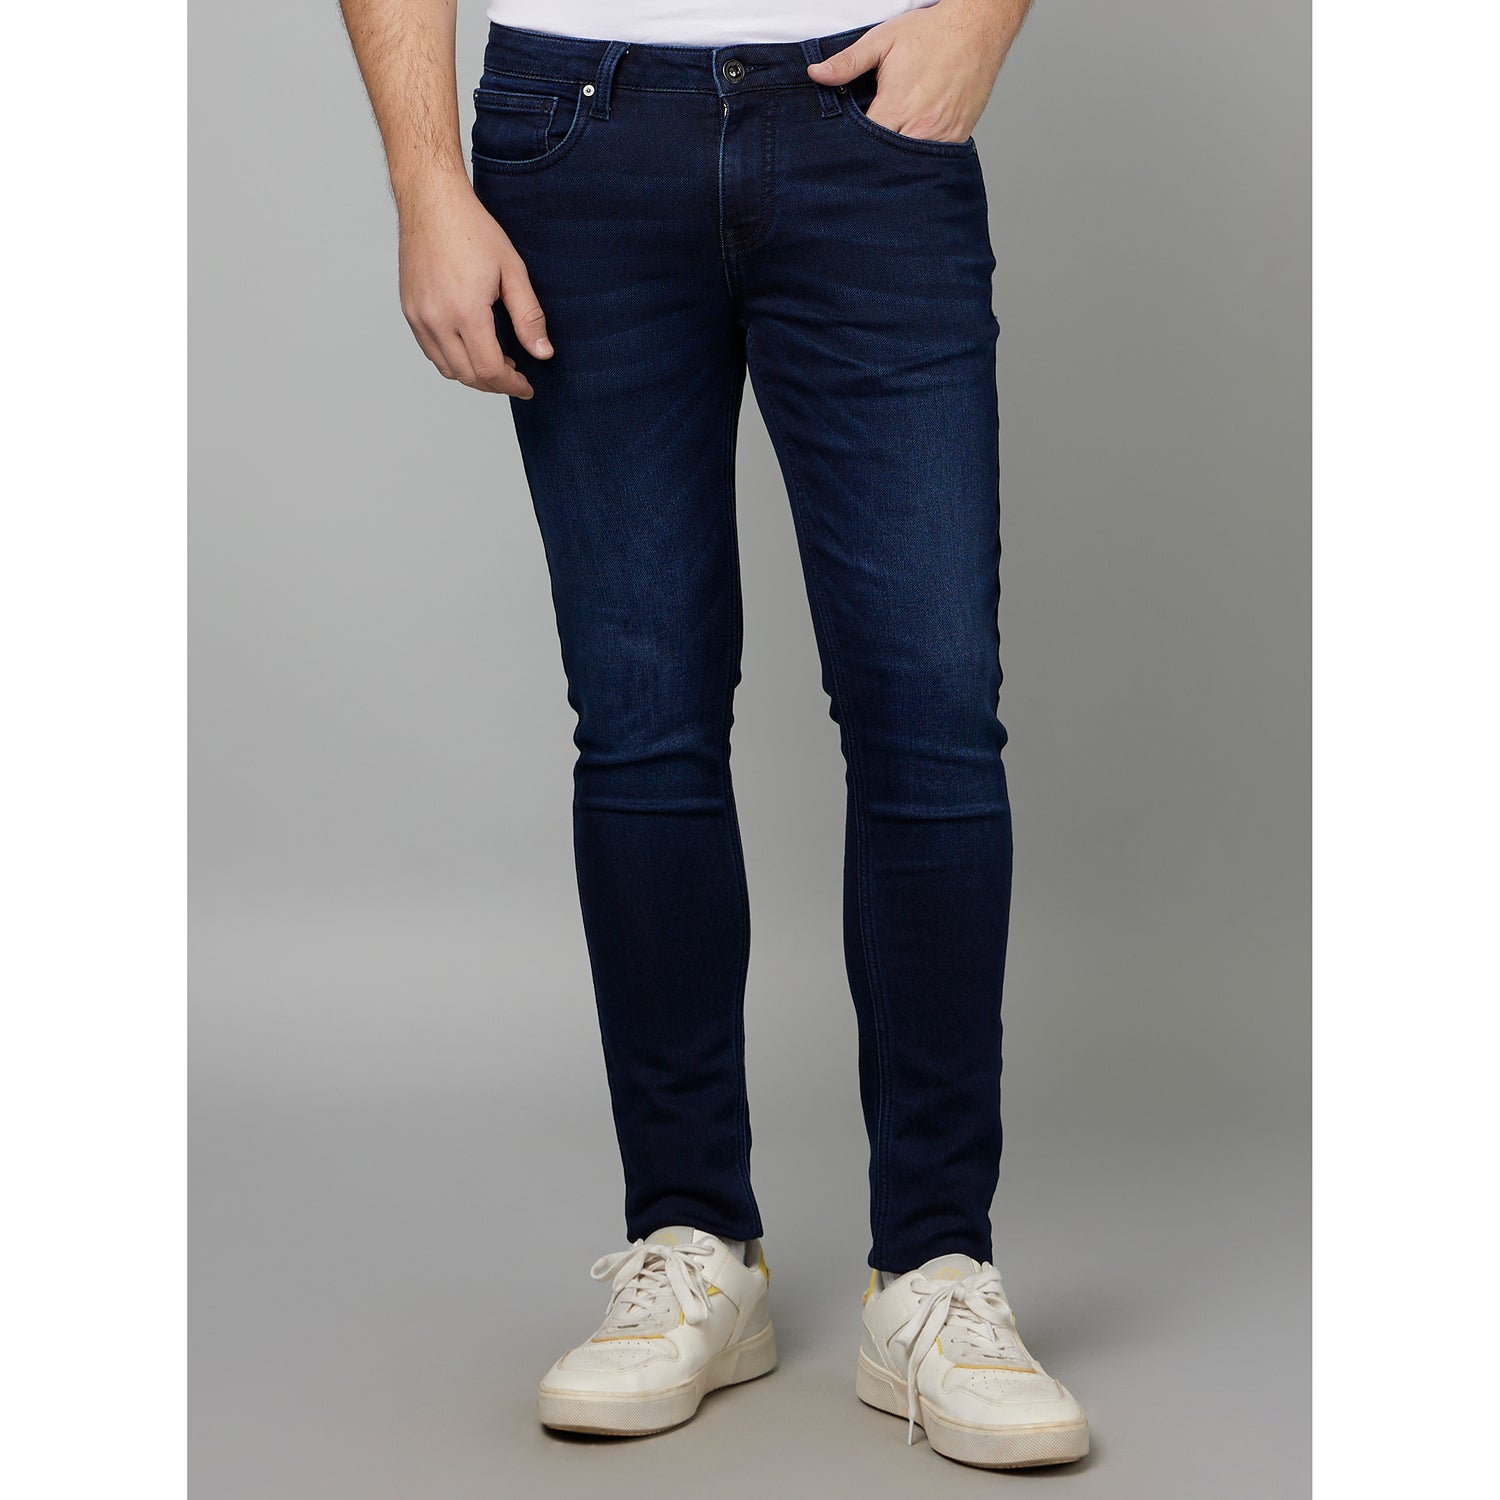 Navy Blue Skinny Fit Clean Look Jeans (FOFIRST45)